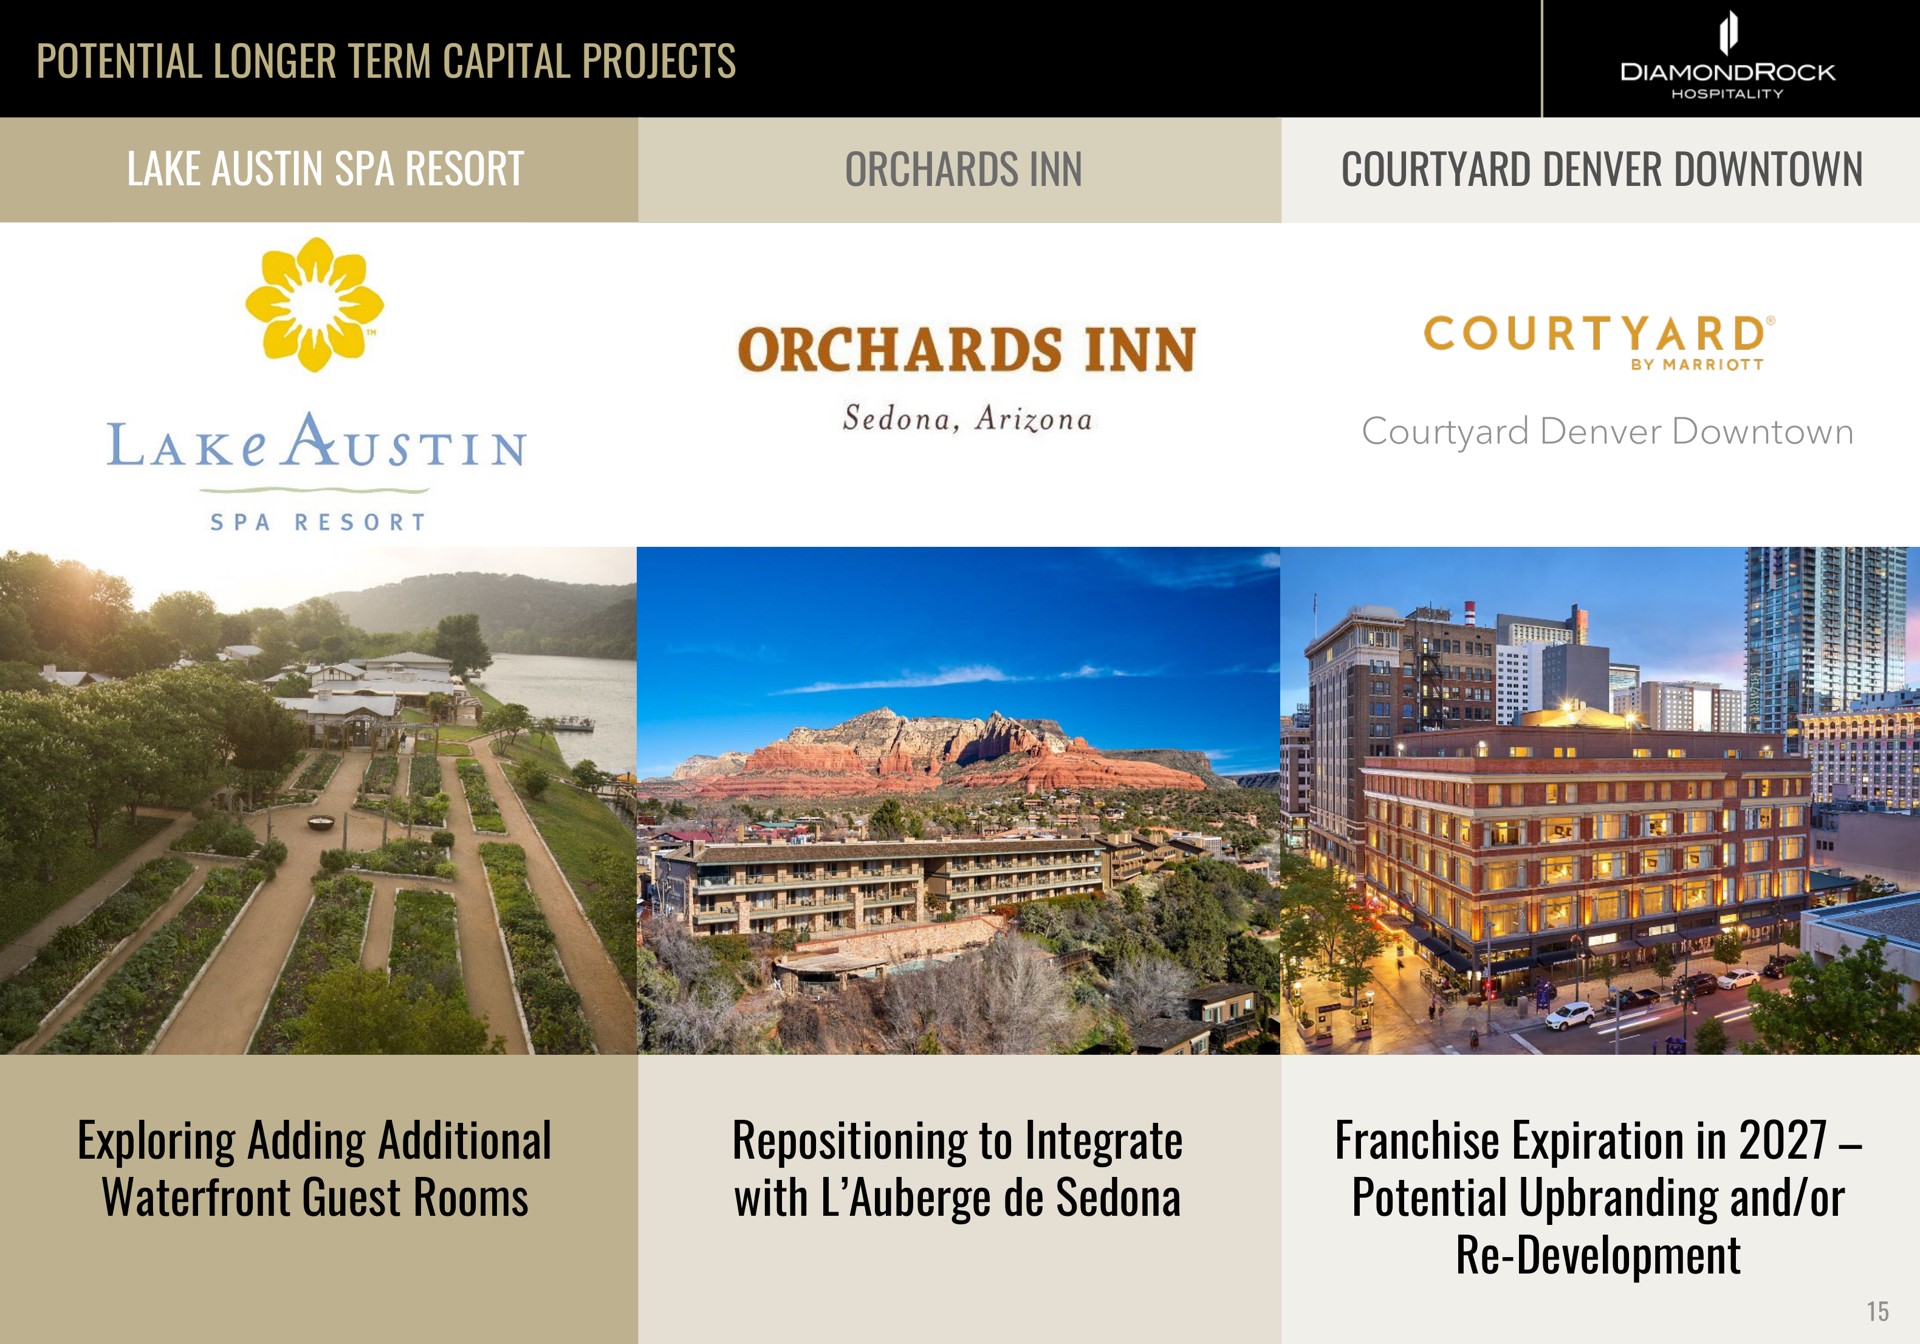 potential longer term capital projects lake spa resort orchards inn courtyard downtown courtyard downtown exploring adding additional waterfront guest rooms repositioning to integrate with franchise expiration in potential and or development | DiamondRock Hospitality